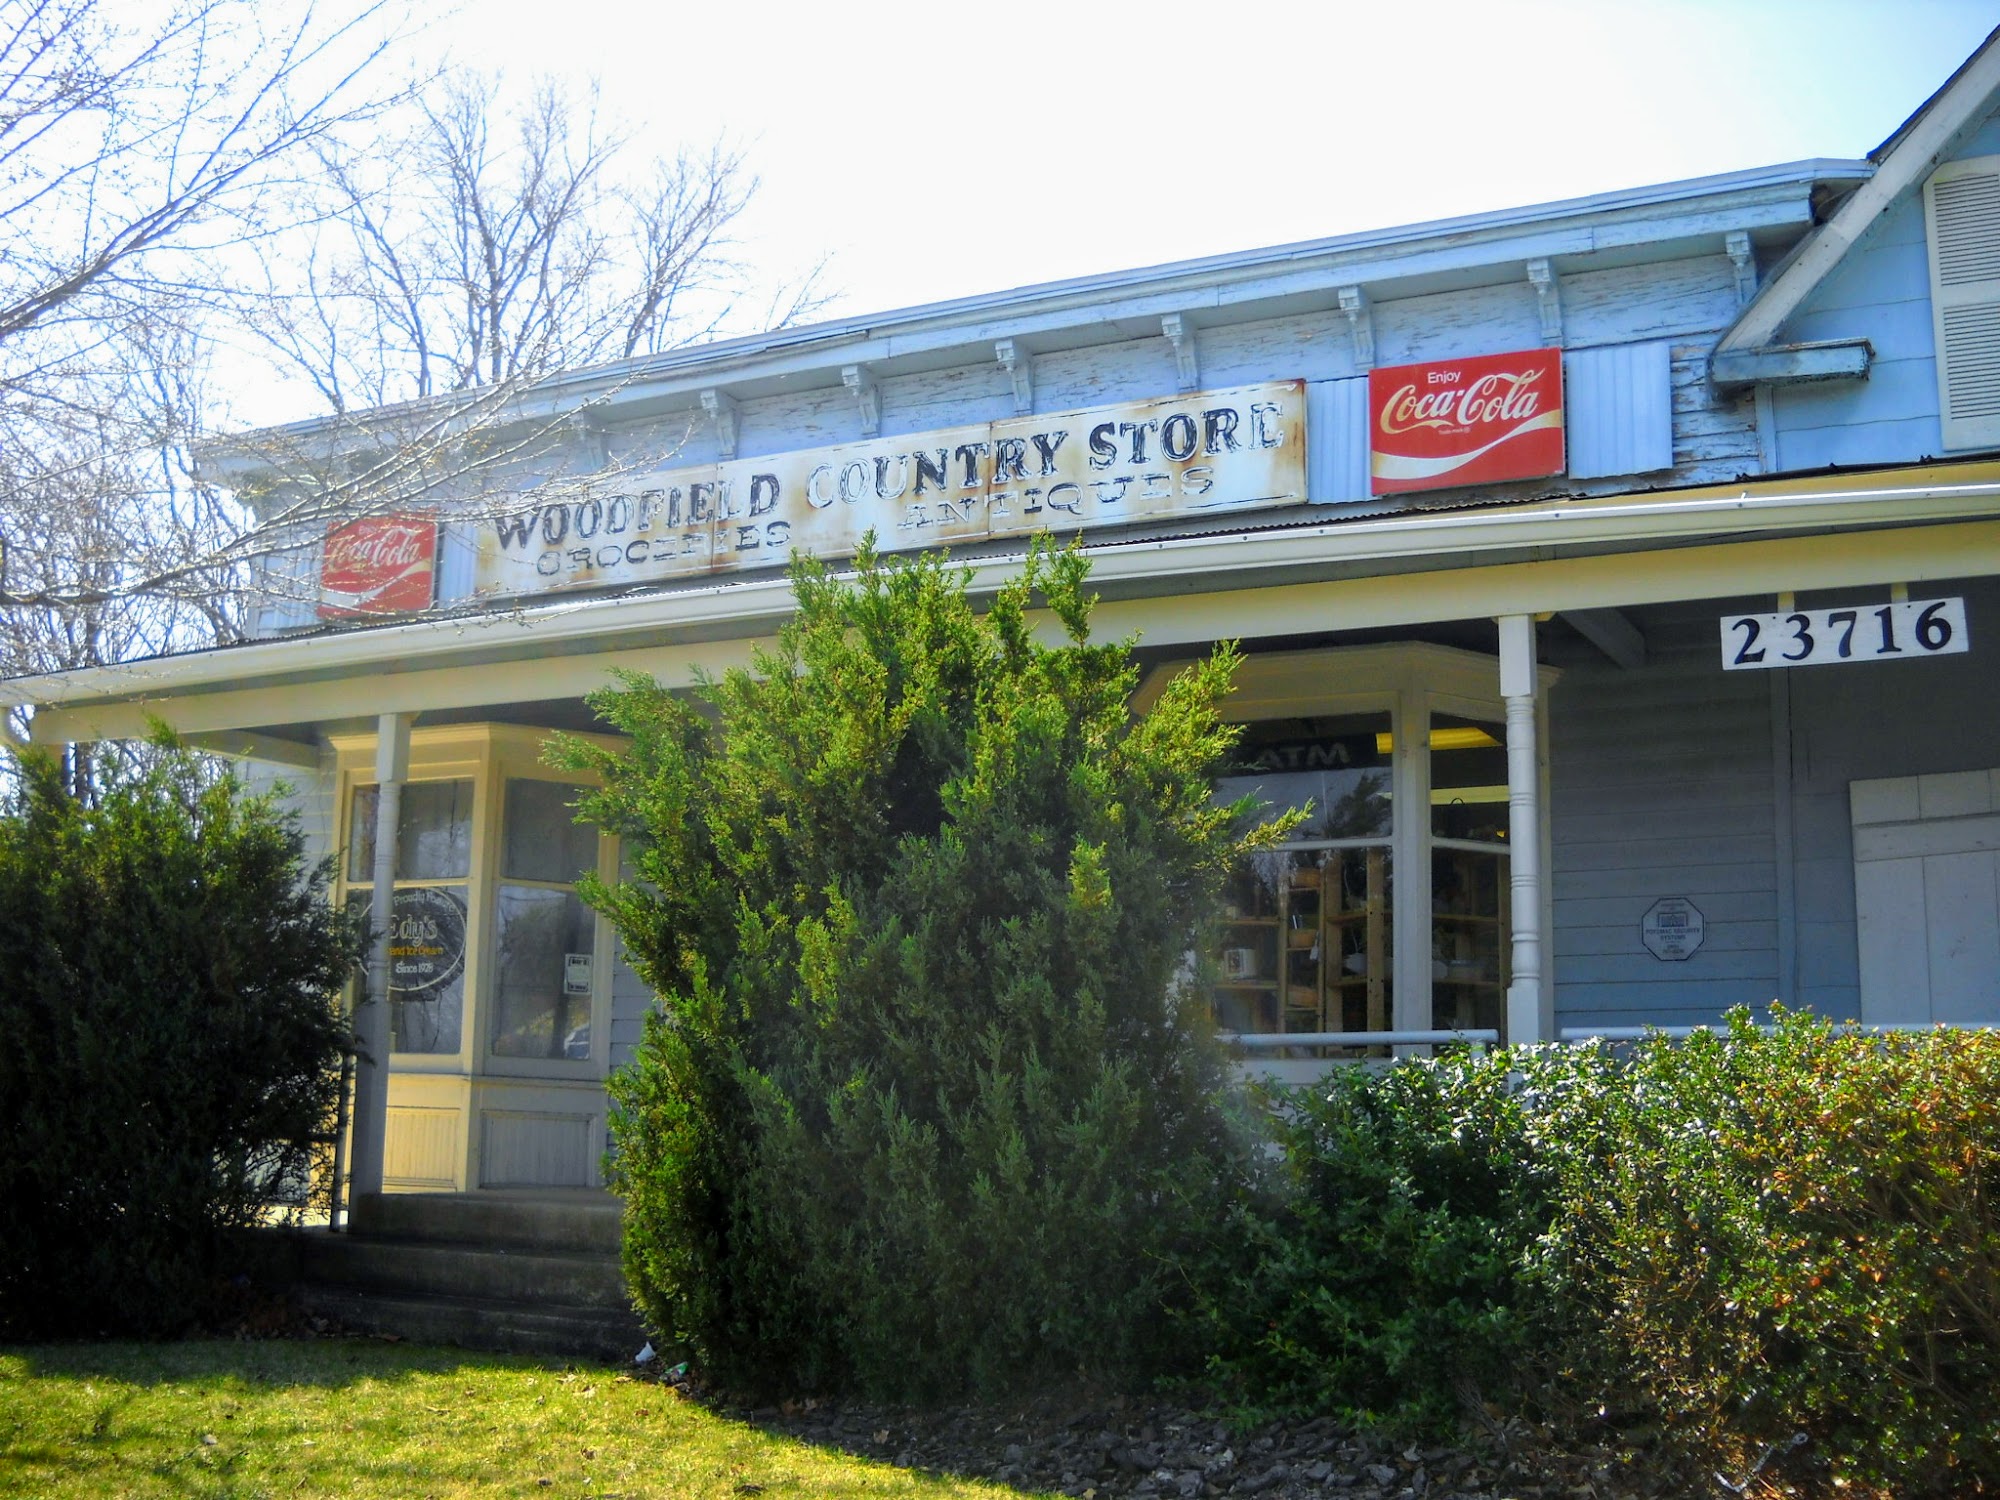 Woodfield Country Store